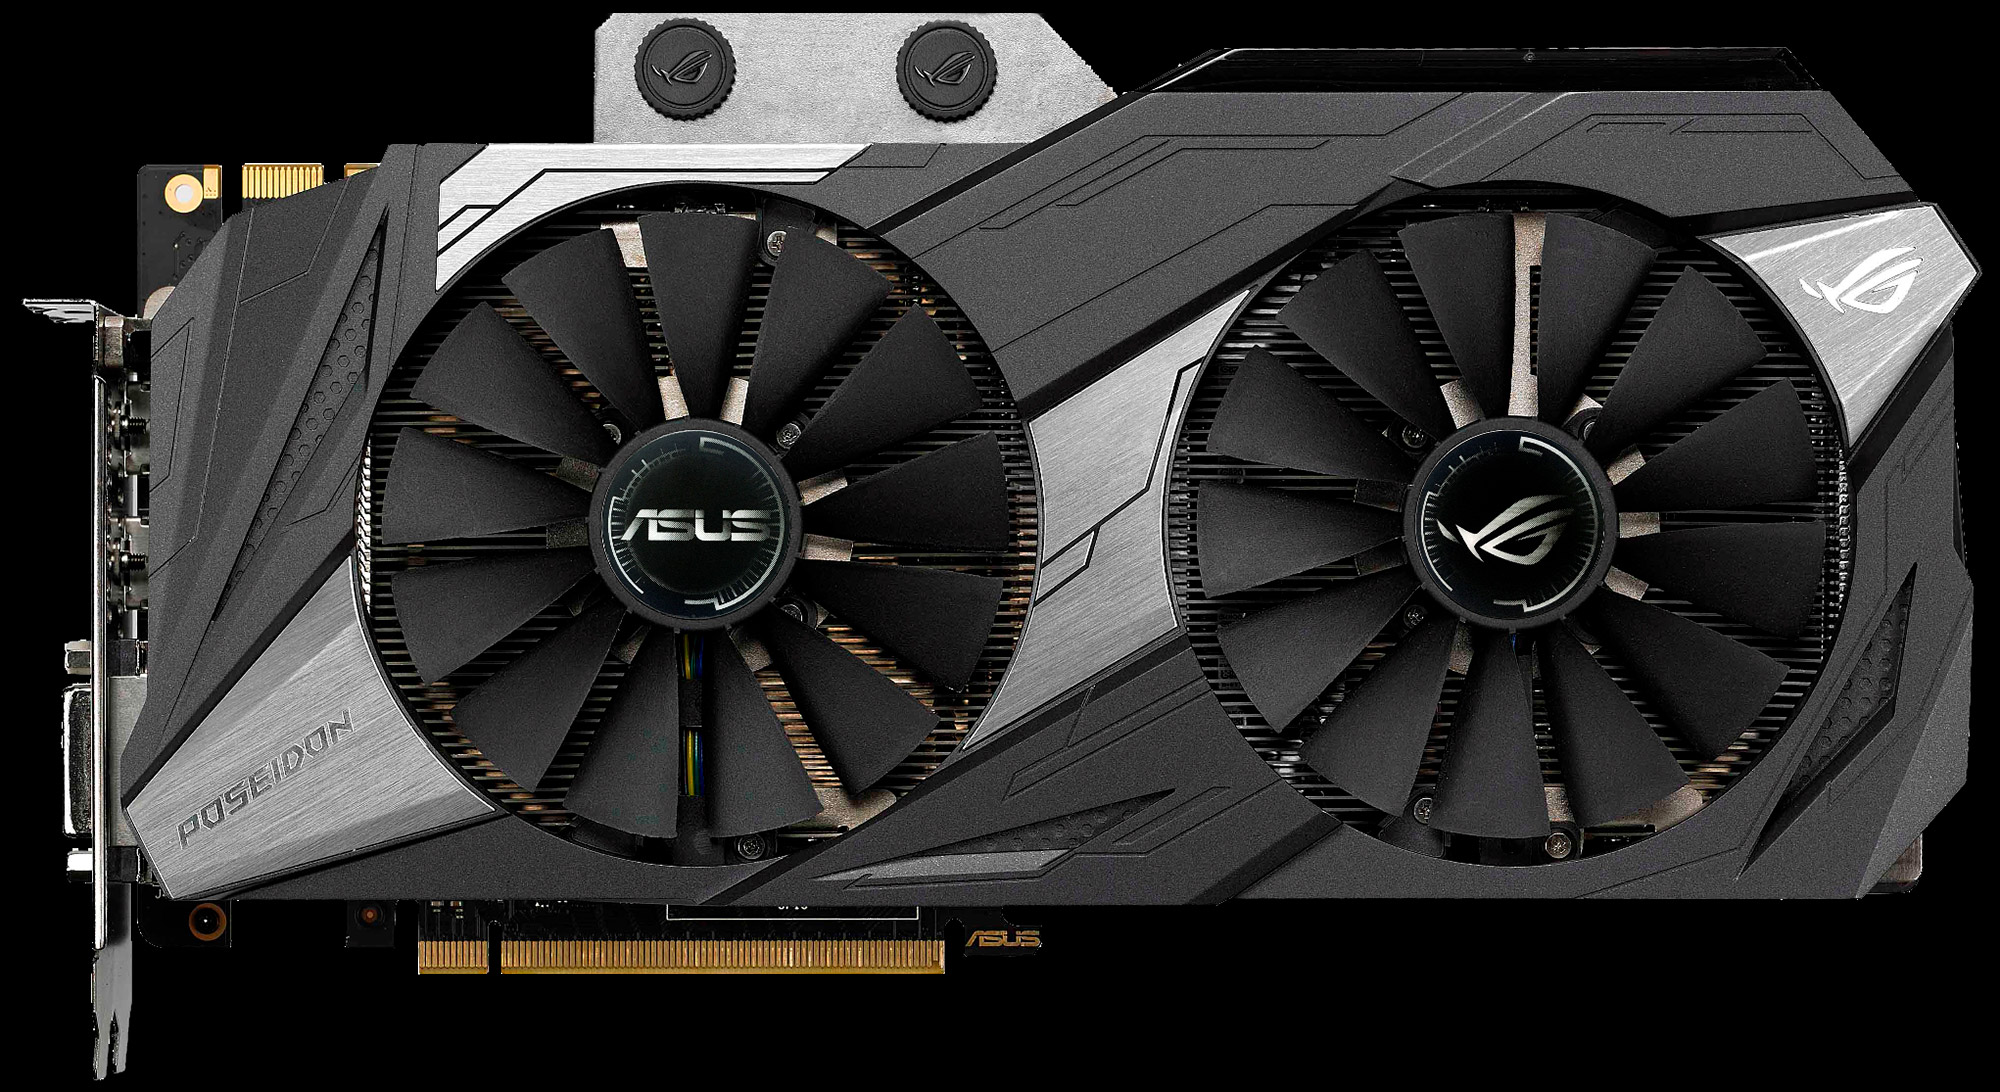 The Poseidon GTX 1080 Ti and other new ROG products debut at JTR: Outshine  the Competition | ROG - Republic of Gamers Global